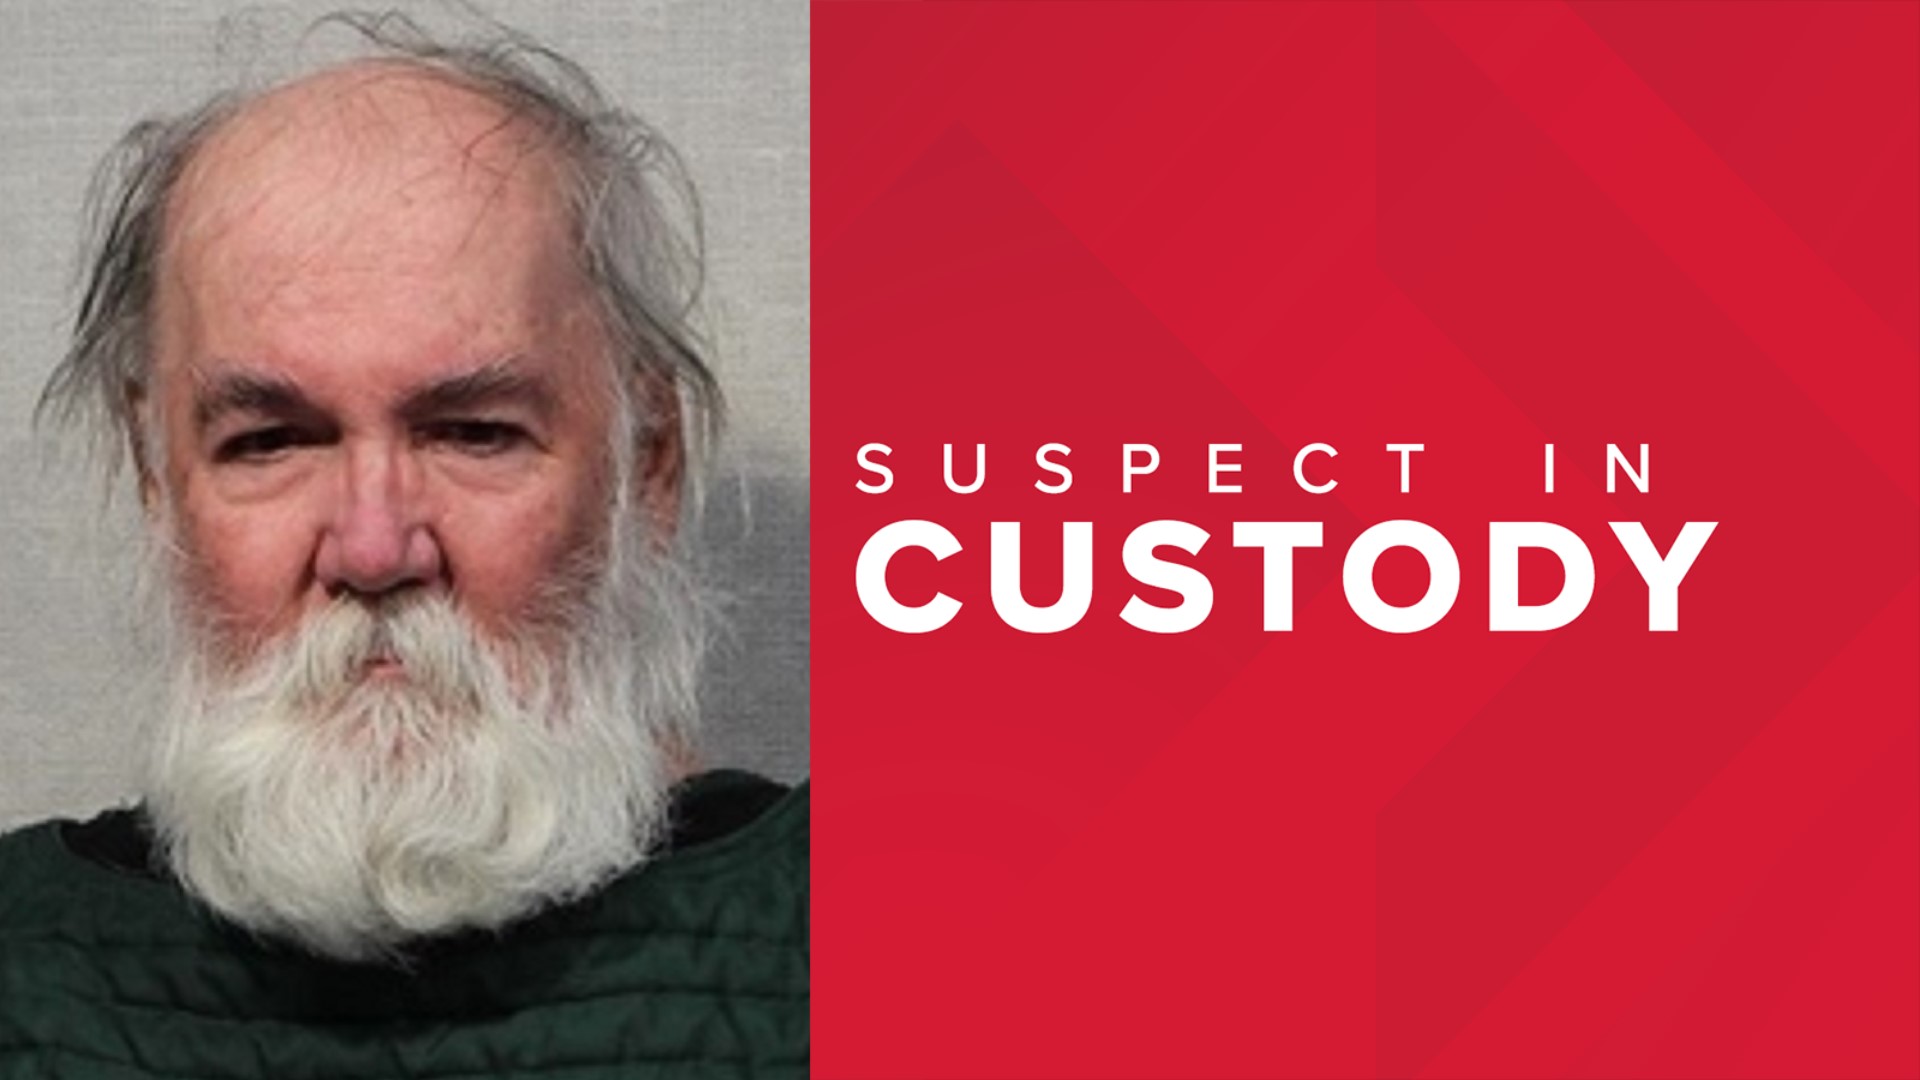 Detectives arrested 61-year-old Ronald Anderson, of Seymour, for his alleged role in the murder of 24-year-old Clifford Smith in 1982.